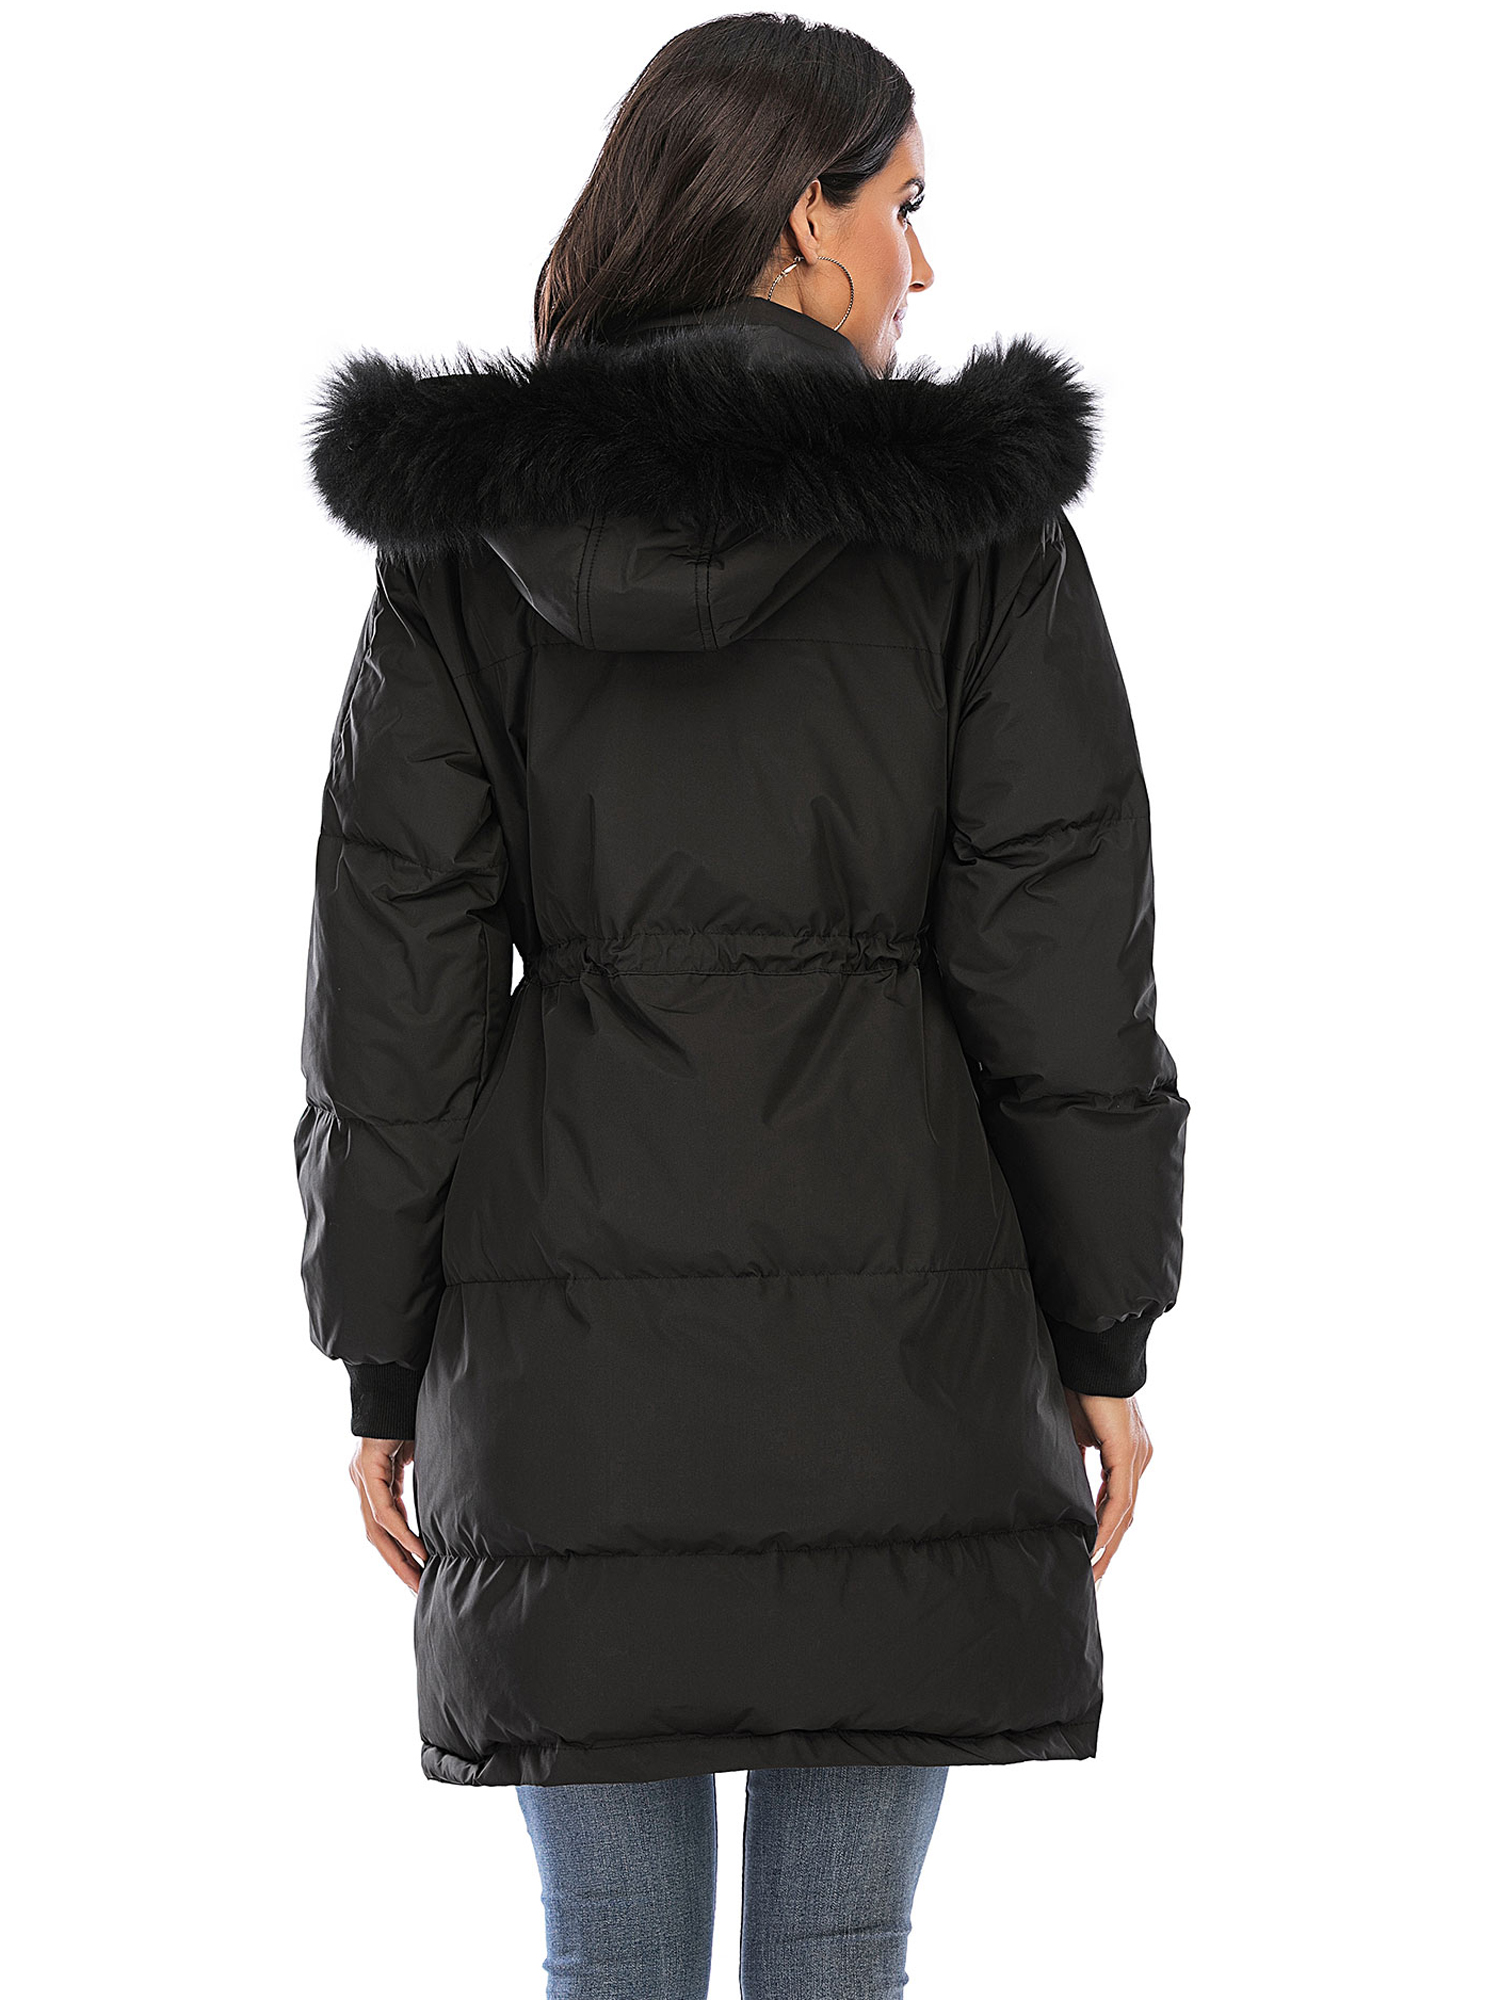 LELINTA Women's Down Blend Quilted Jacket Puffer Jacket Detachable Hood with Fur Collar, Camouflage - image 5 of 7